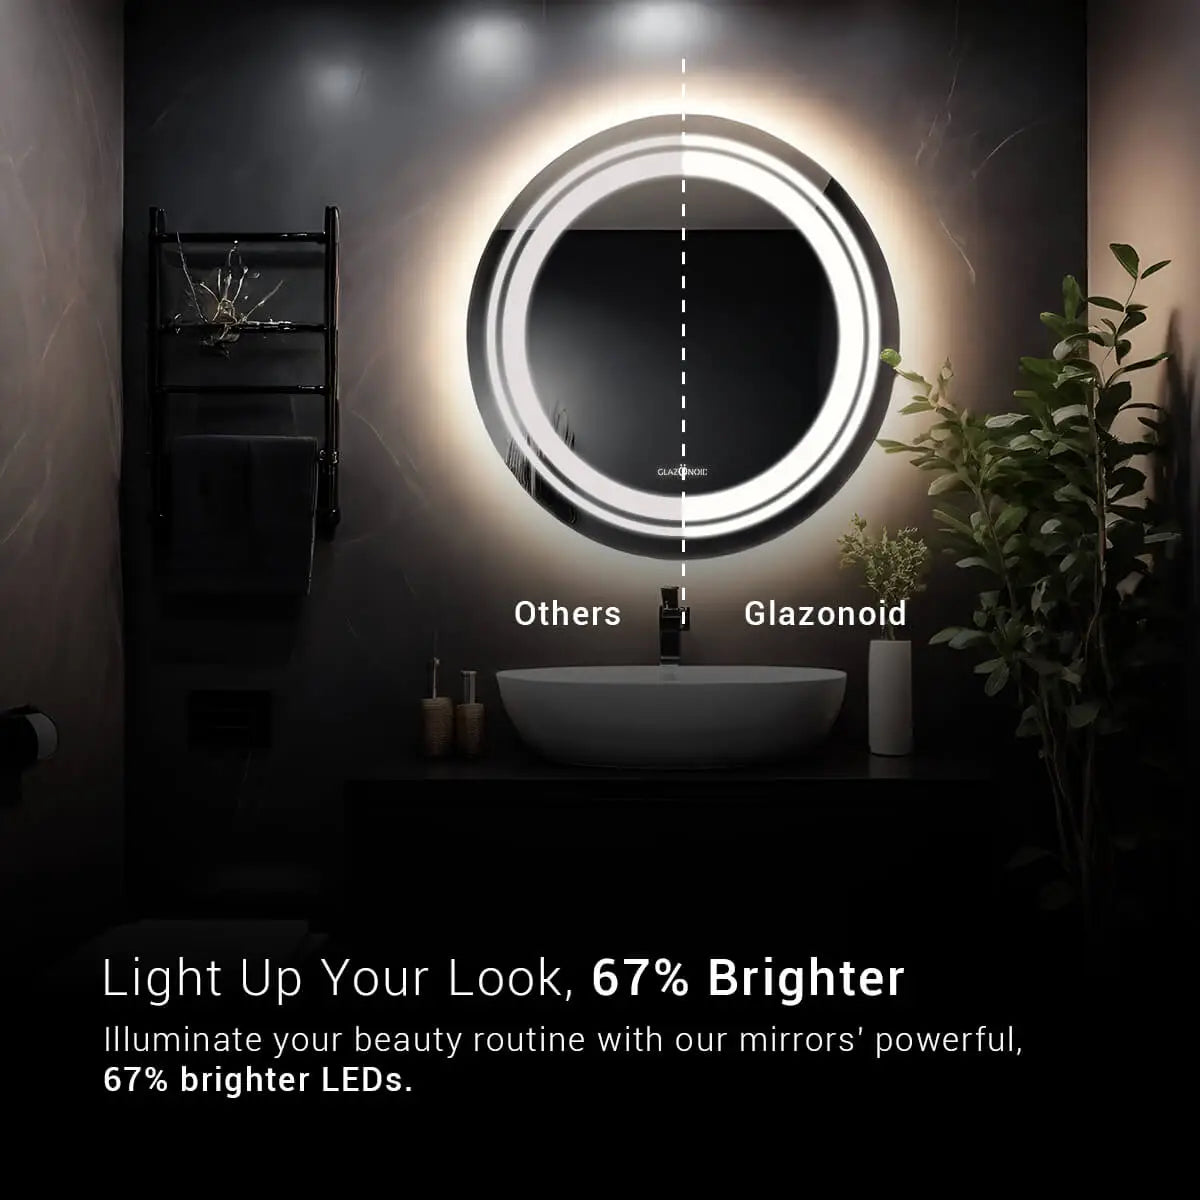 A round mirror with a built-in light ring is mounted on the wall above a bathroom sink. The text overlay reads "Light Up Your Look, 67% Brighter. Illuminate your beauty routine with our mirrors' powerful, 67% brighter LEDs."  This type of mirror is sometimes called a vanity mirror or a lighted bathroom mirror.